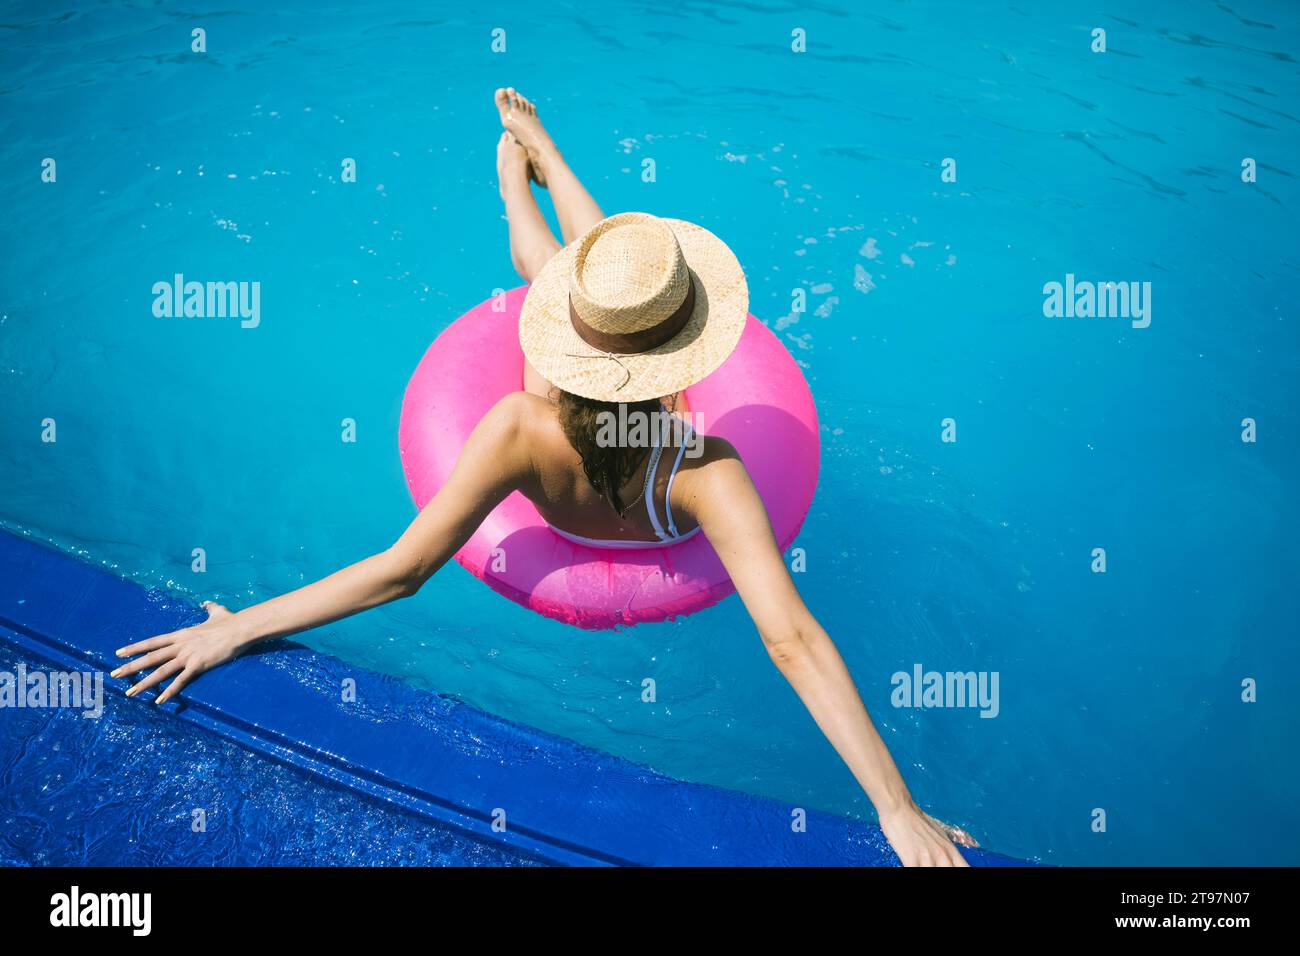 Woman wearing straw hat relaxing on inflatable swim ring in pool Stock Photo